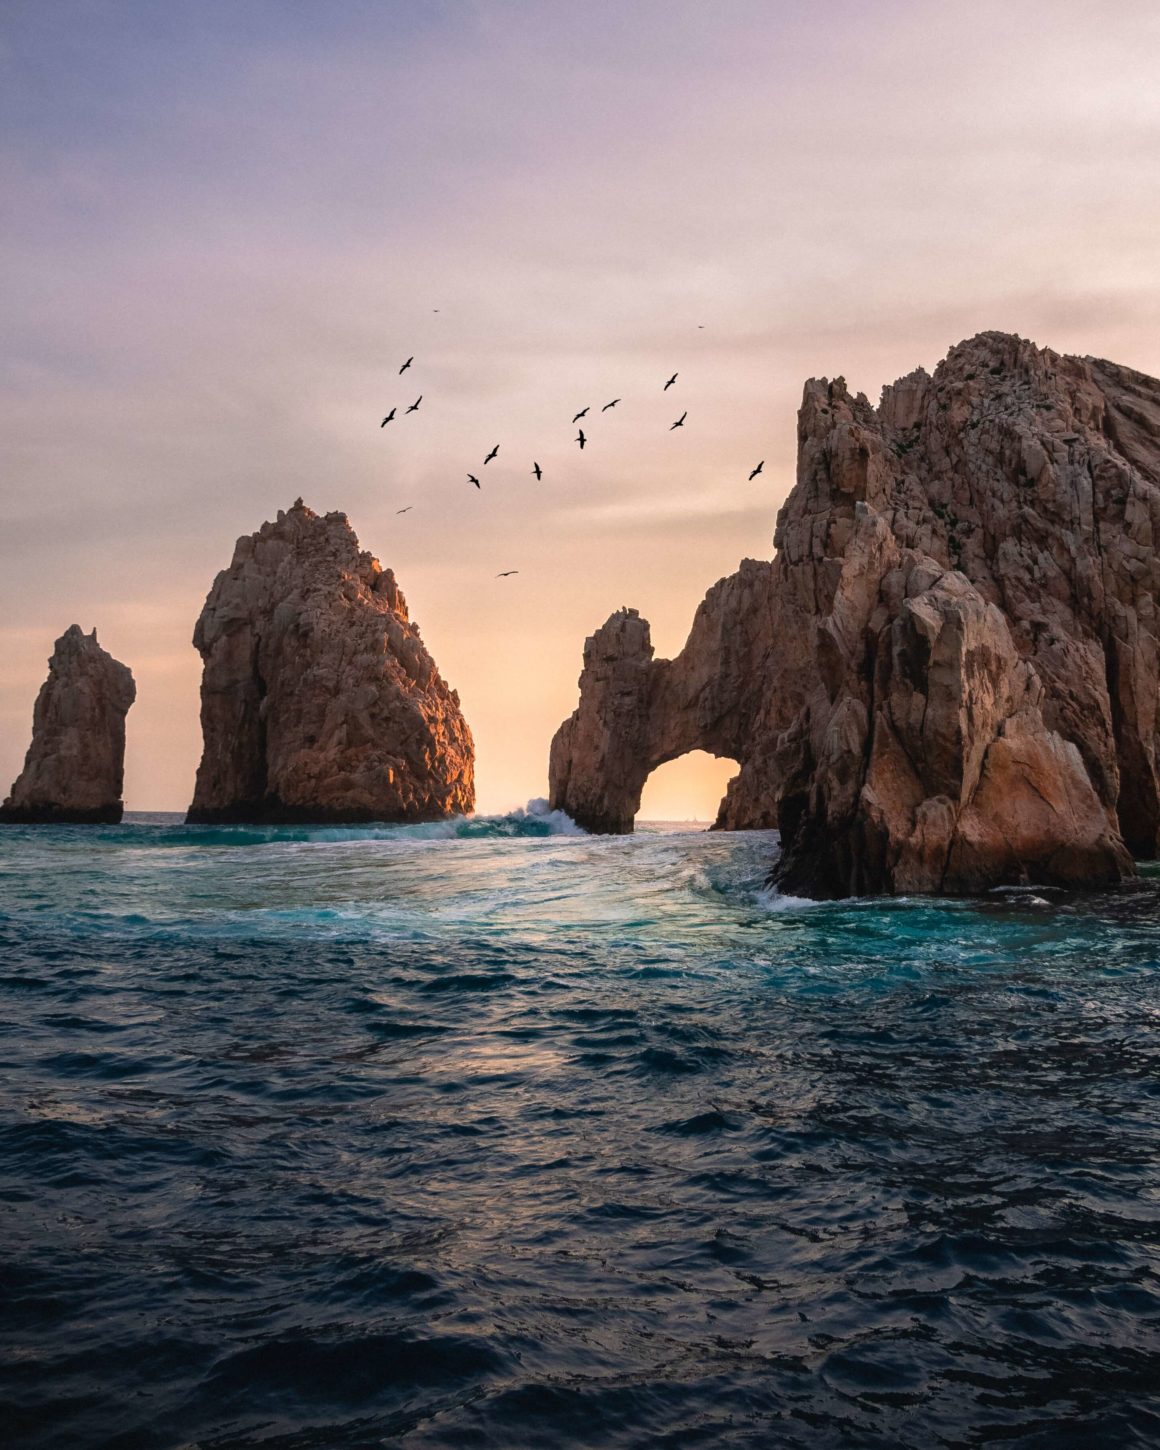 Sunset in Mexico at El Arco in Cabo san lucas